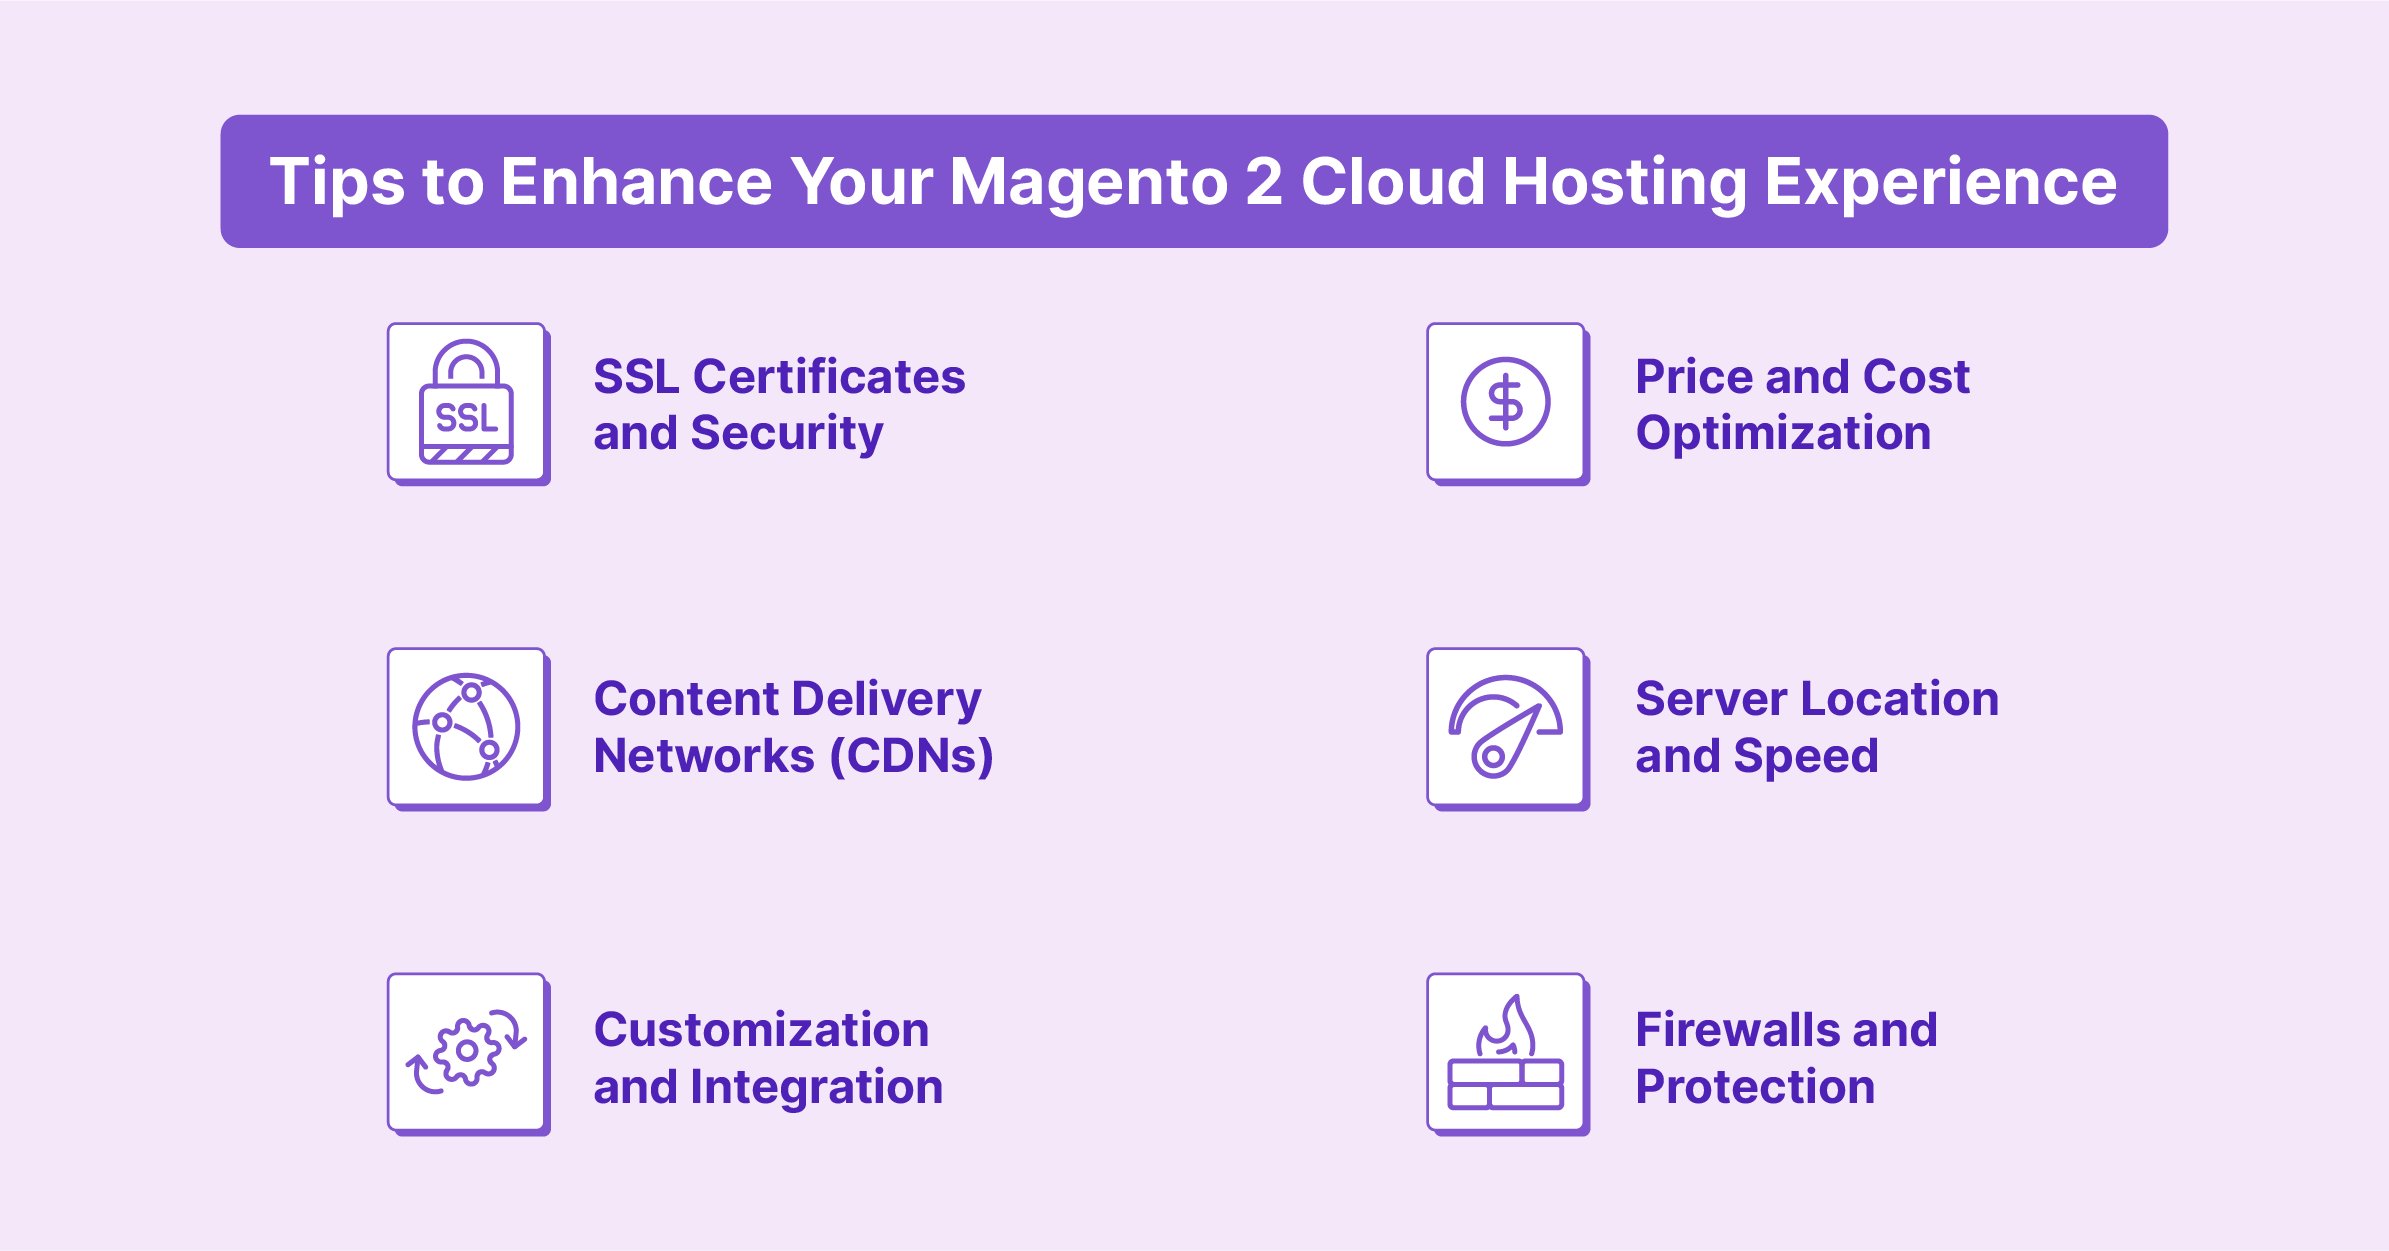 Tips for optimizing Magento 2 Cloud Hosting experience.